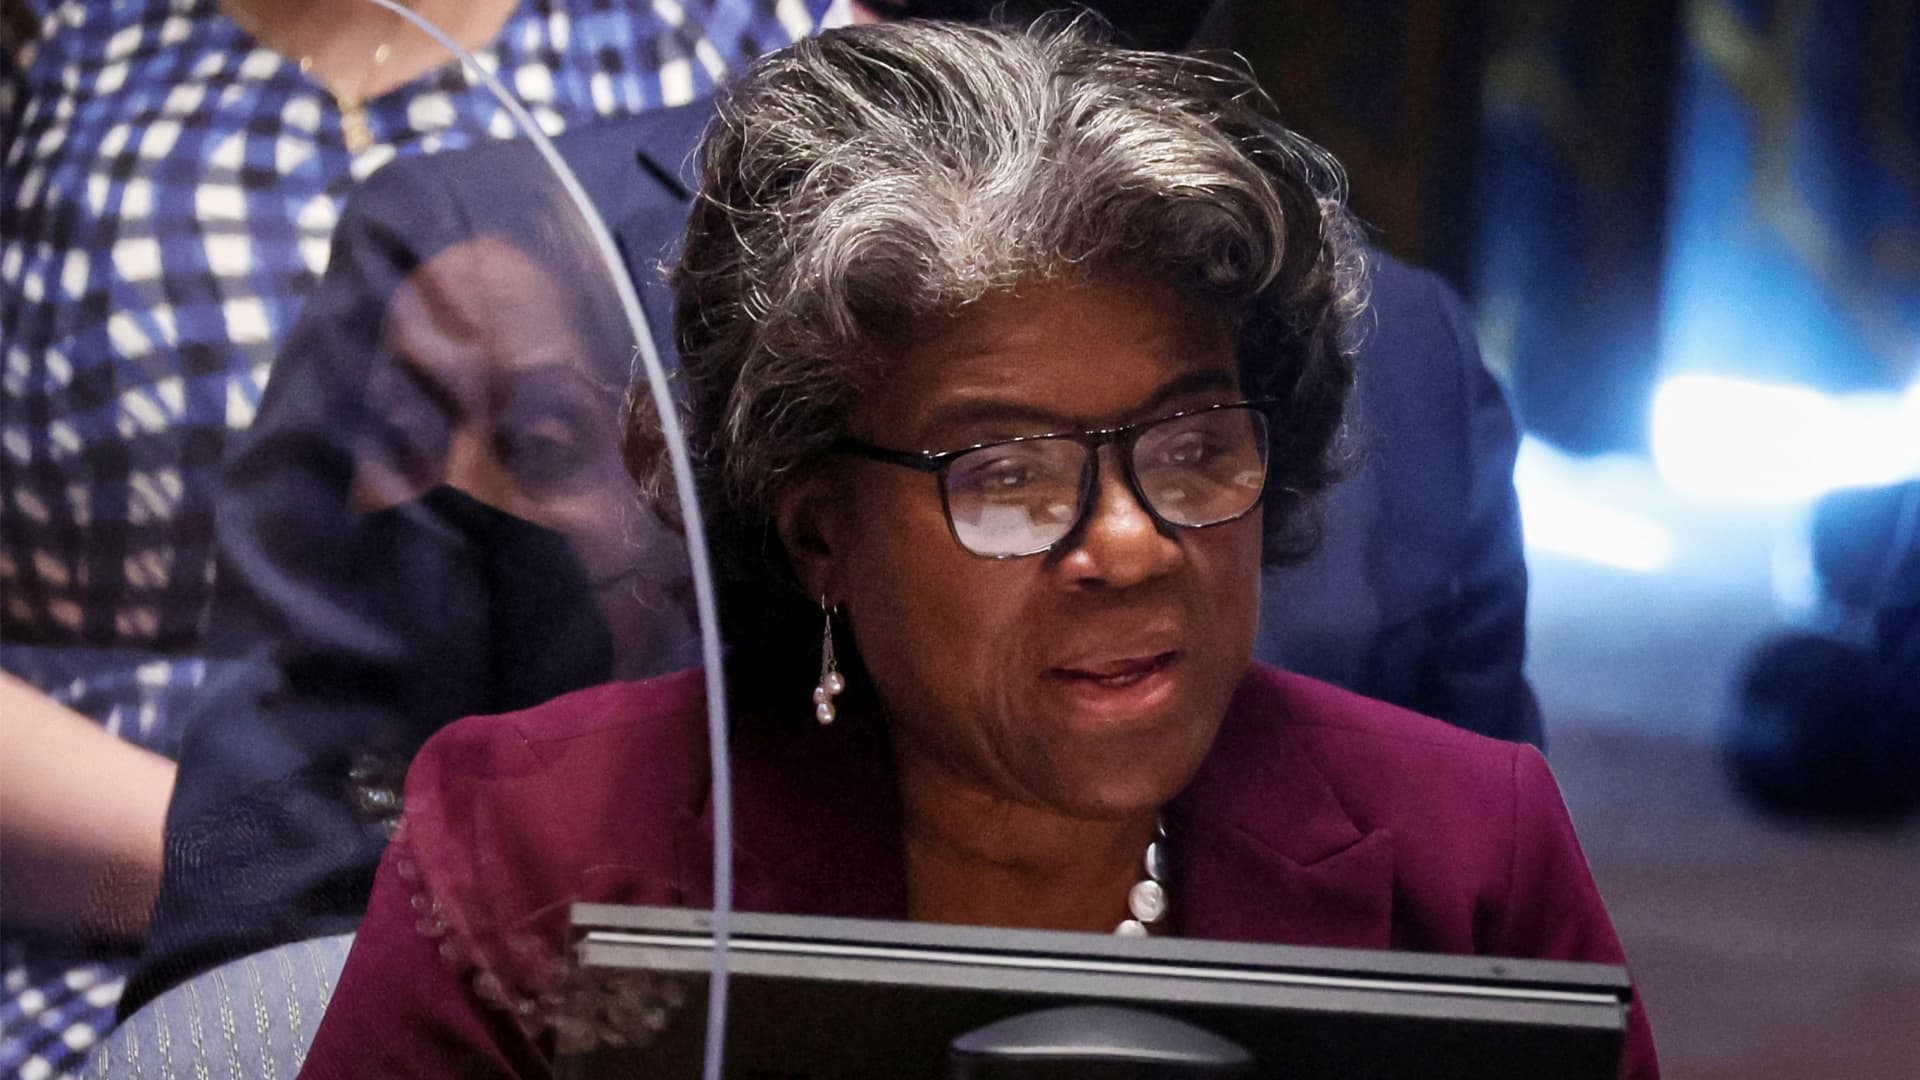 U.S. Ambassador to the United Nations Linda Thomas-Greenfield addresses the United Nations Security Council meeting on the situation amid Russia's invasion of Ukraine with a focus on women, at the United Nations Headquarters in Manhattan, New York City, New York, U.S., April 11, 2022.